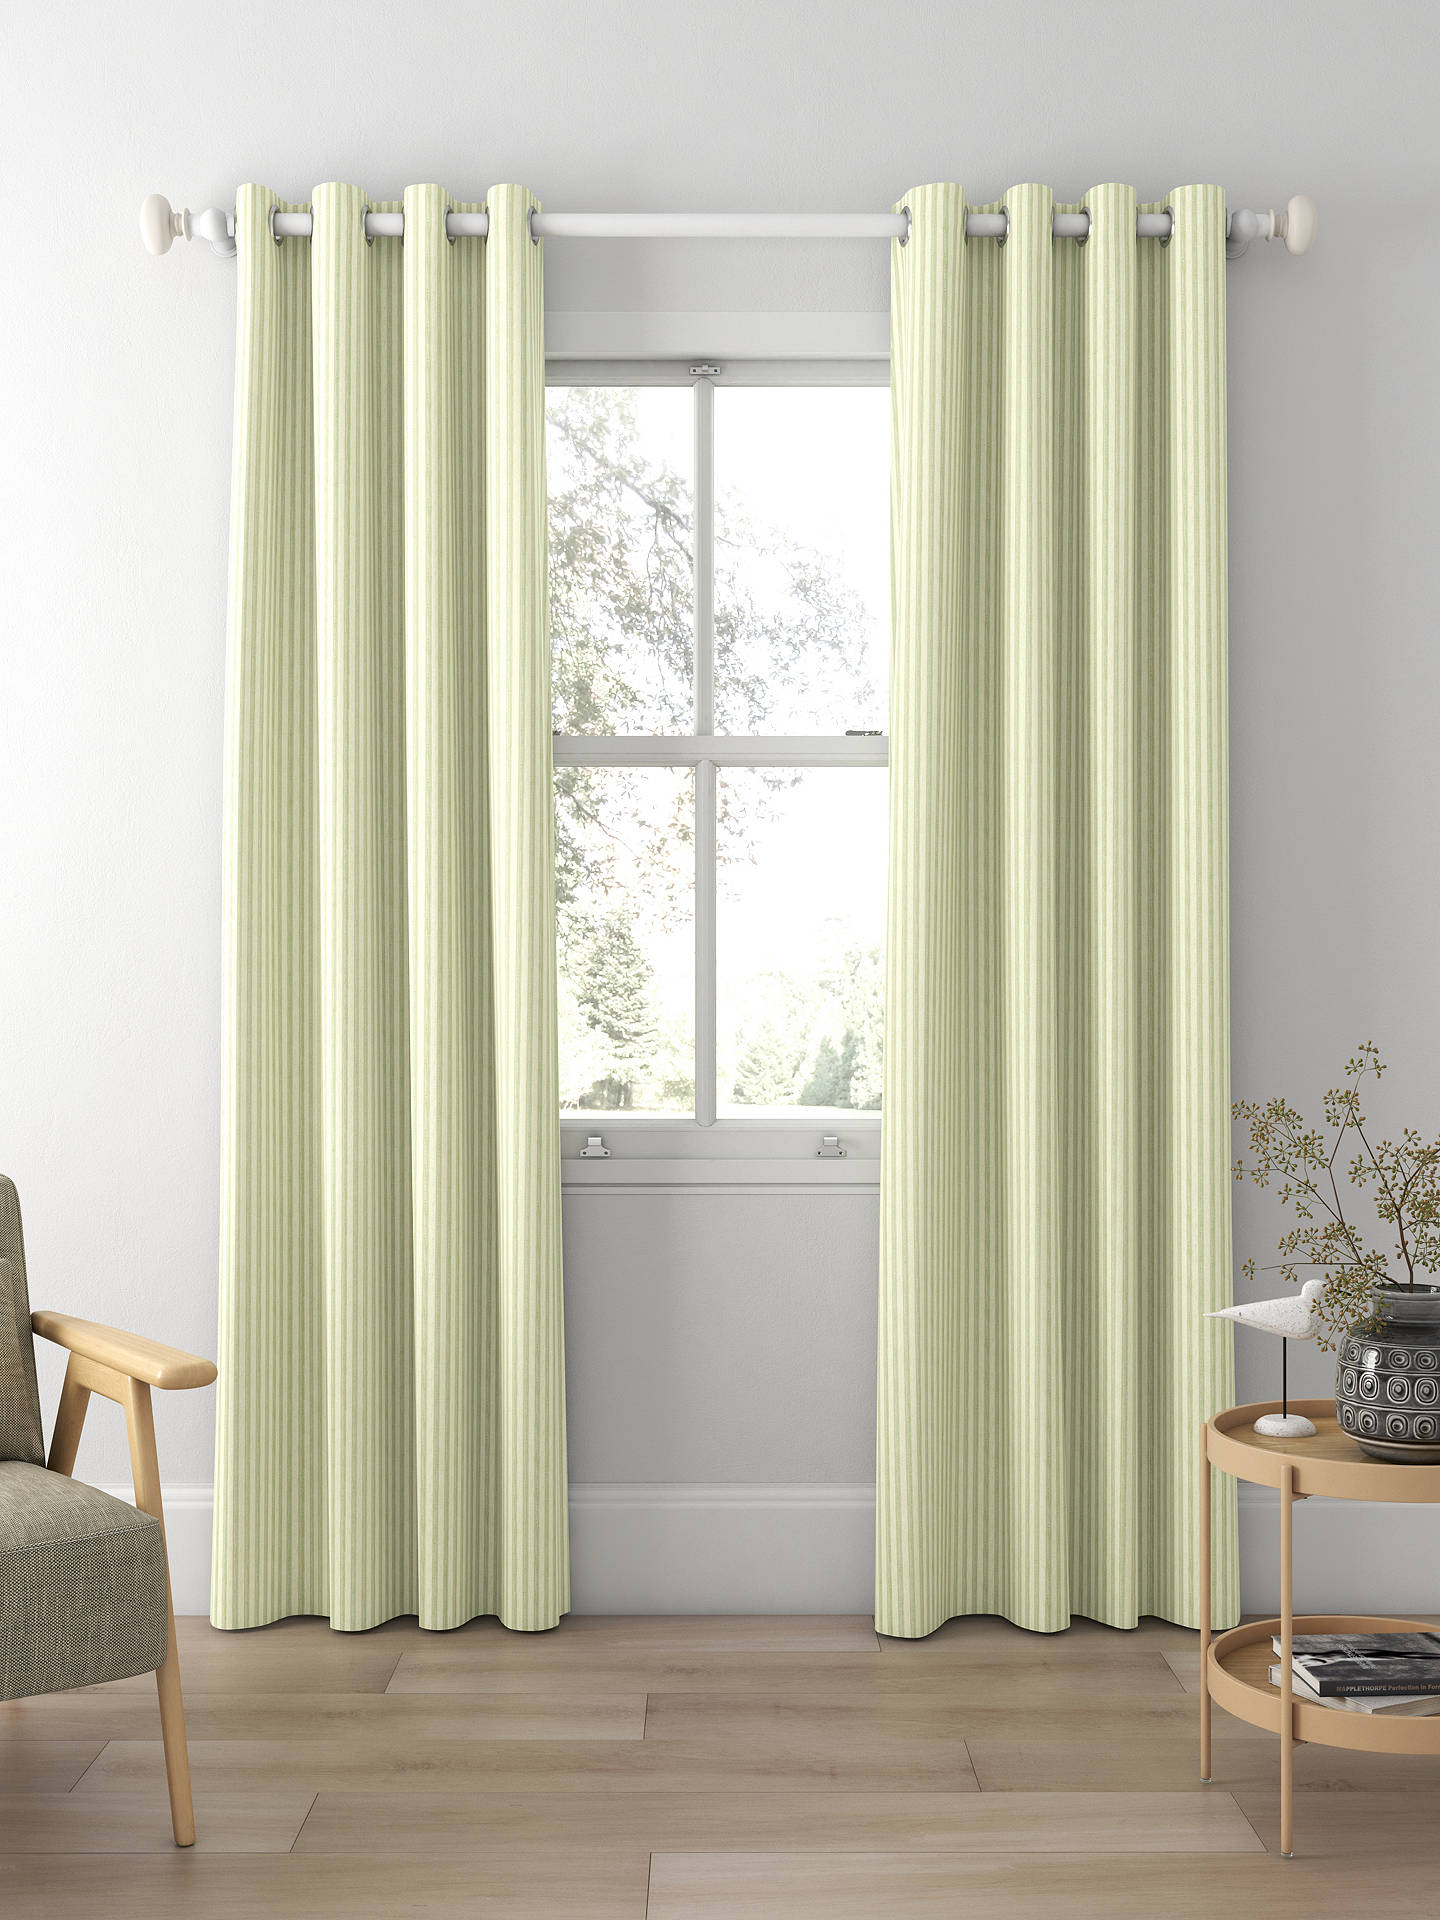 Sanderson Melford Made to Measure Curtains, Sage